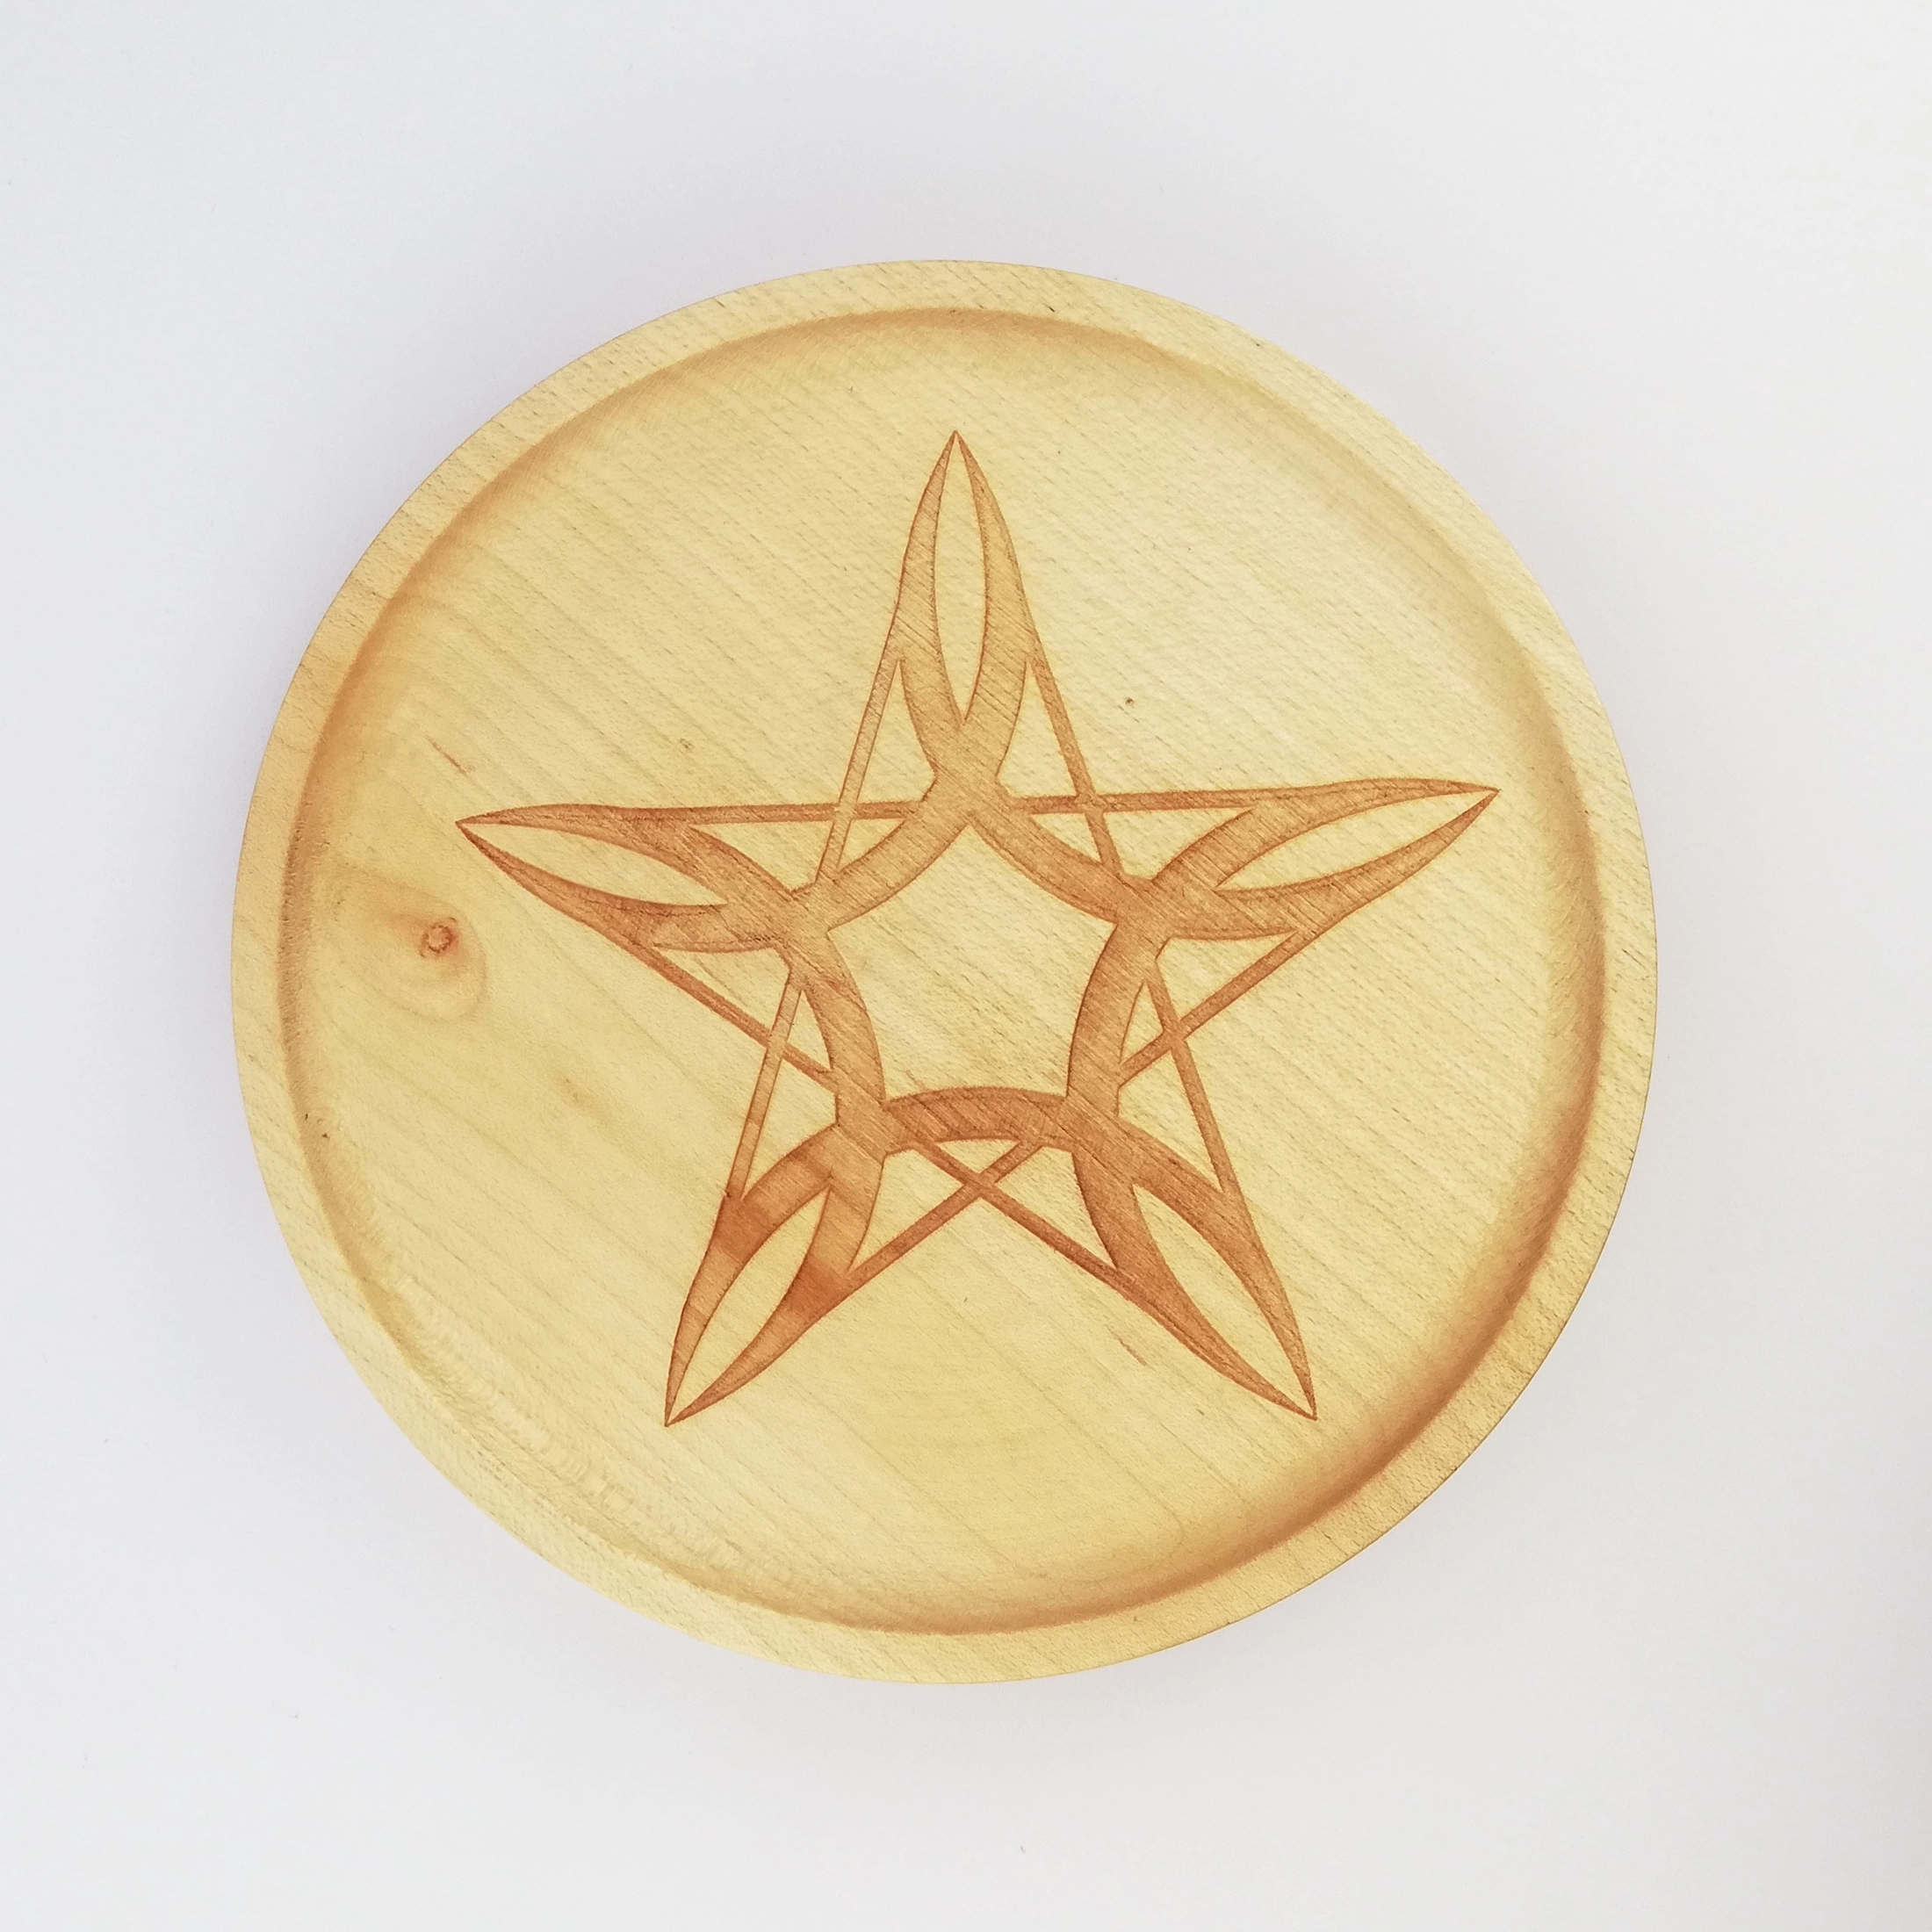 Pentagram on a small plate (16cm/6.3in in diameter), front.